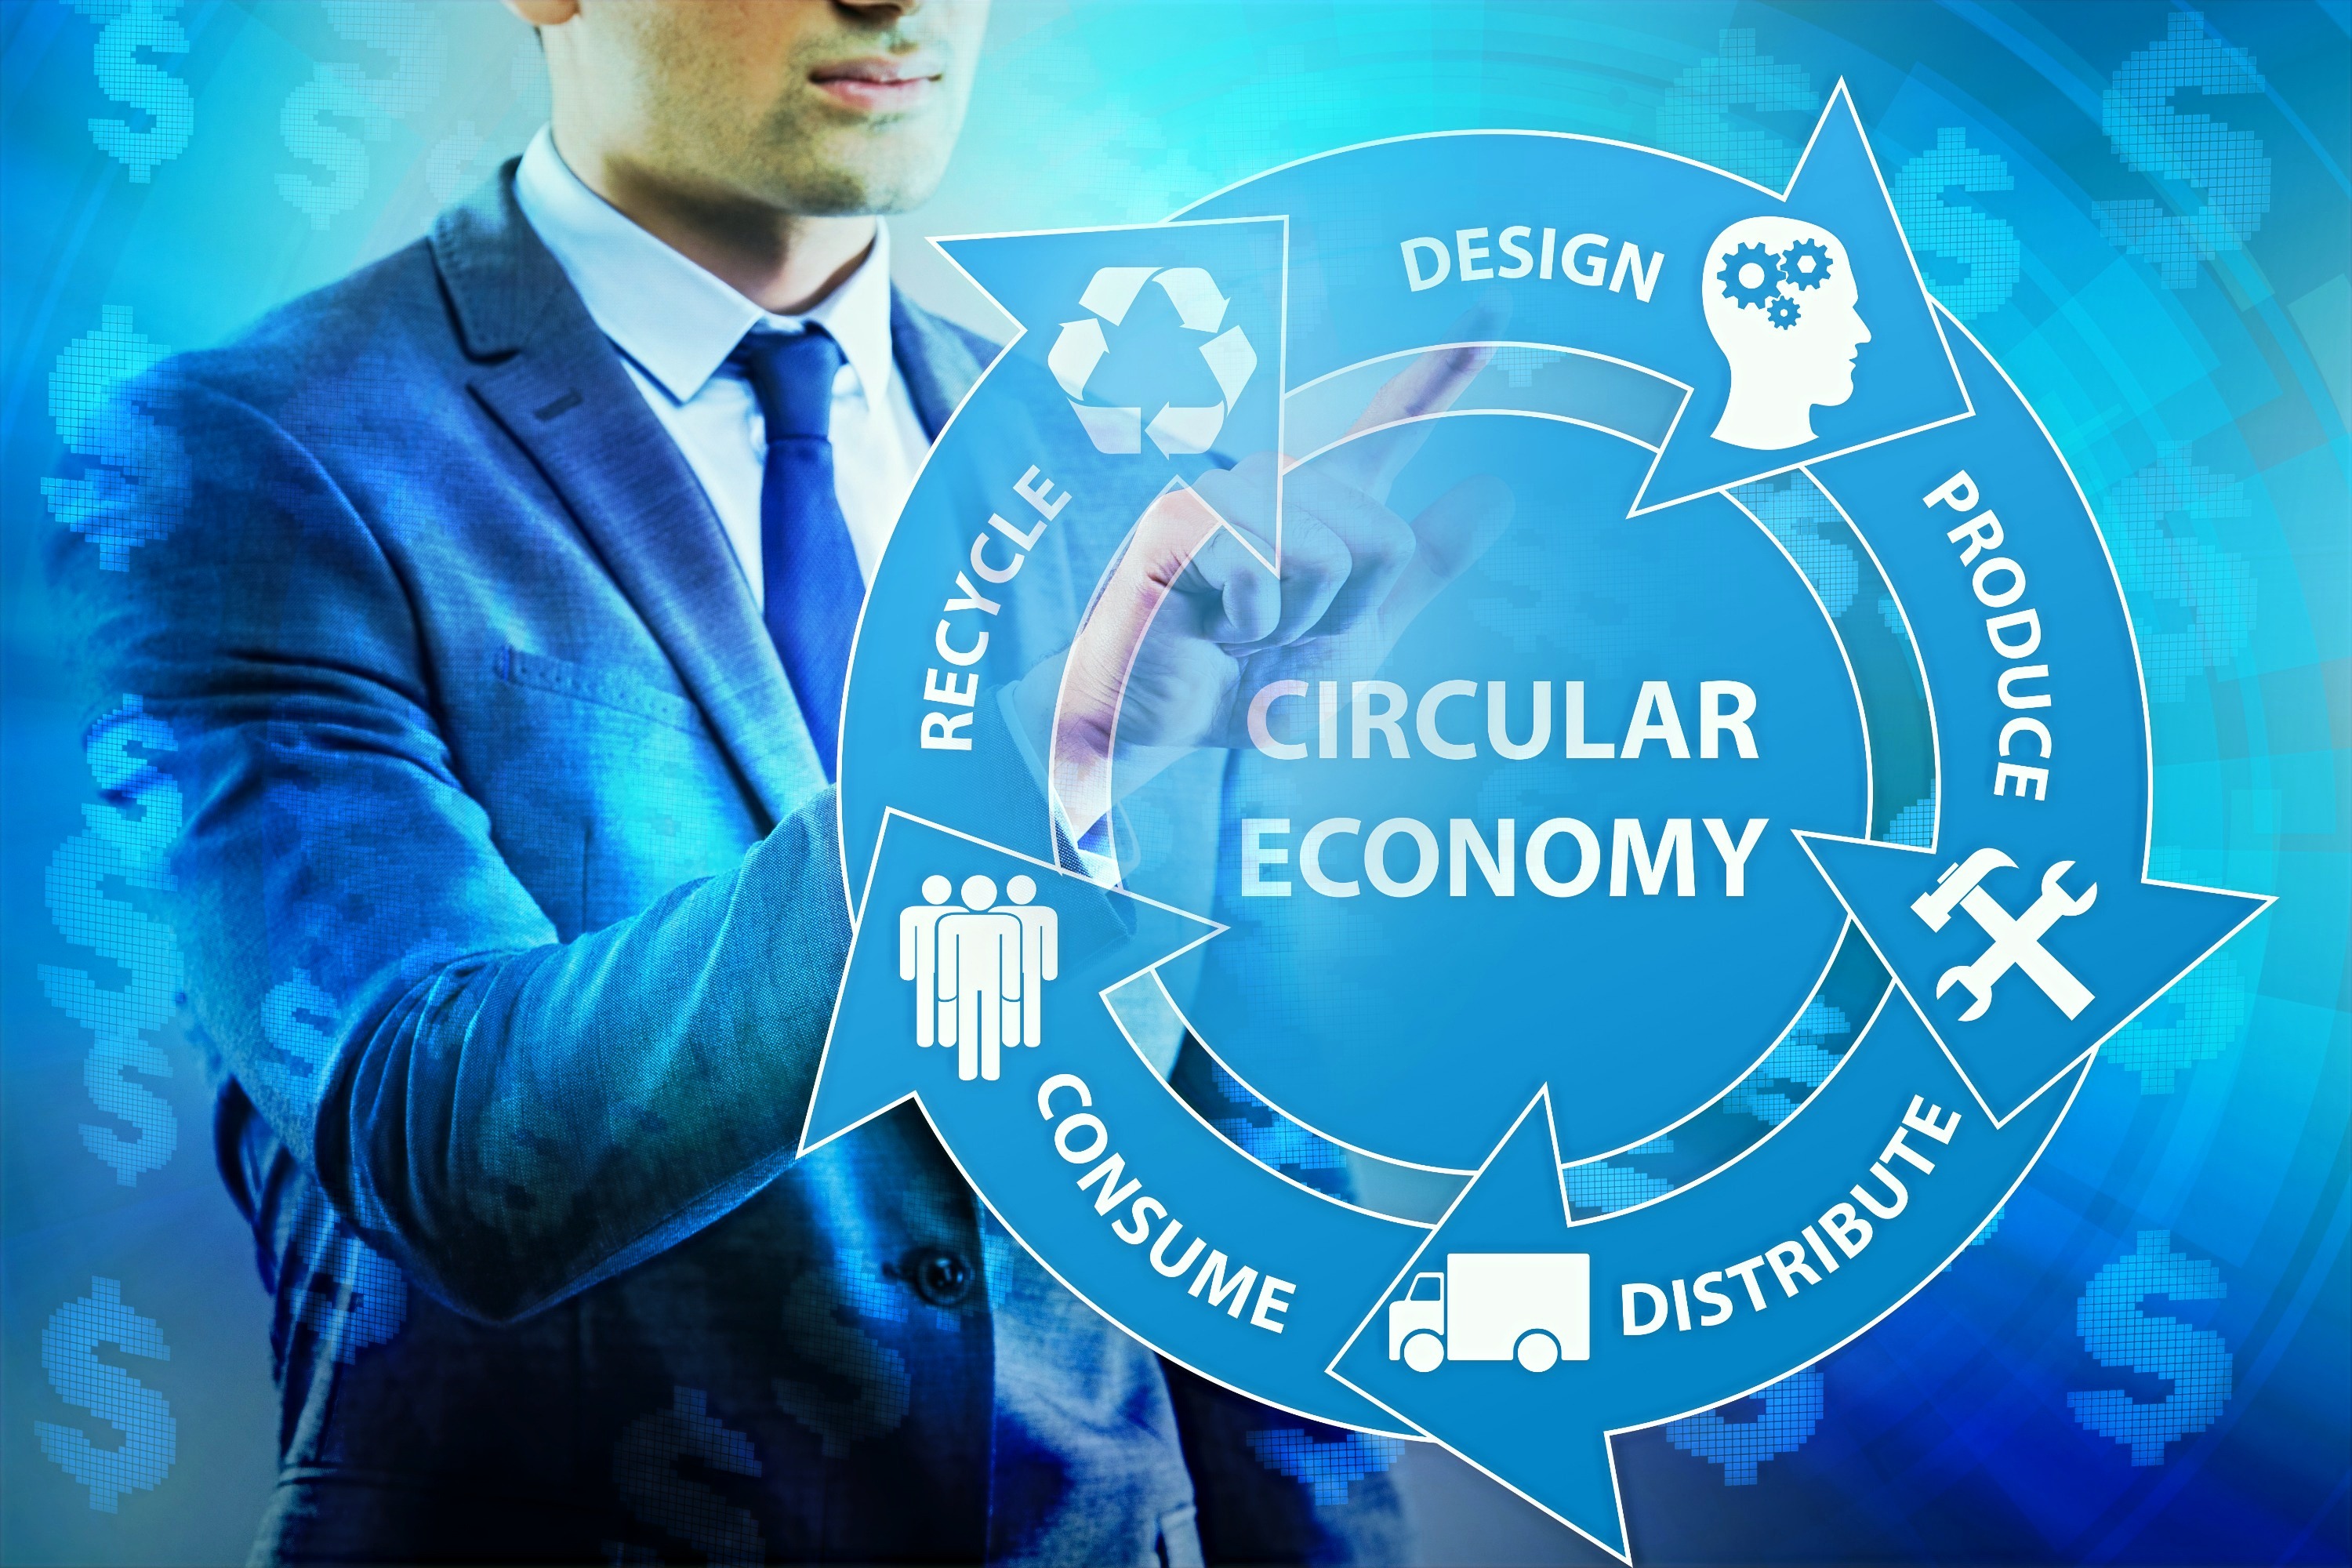 Concept of circular economy with businessman_edited